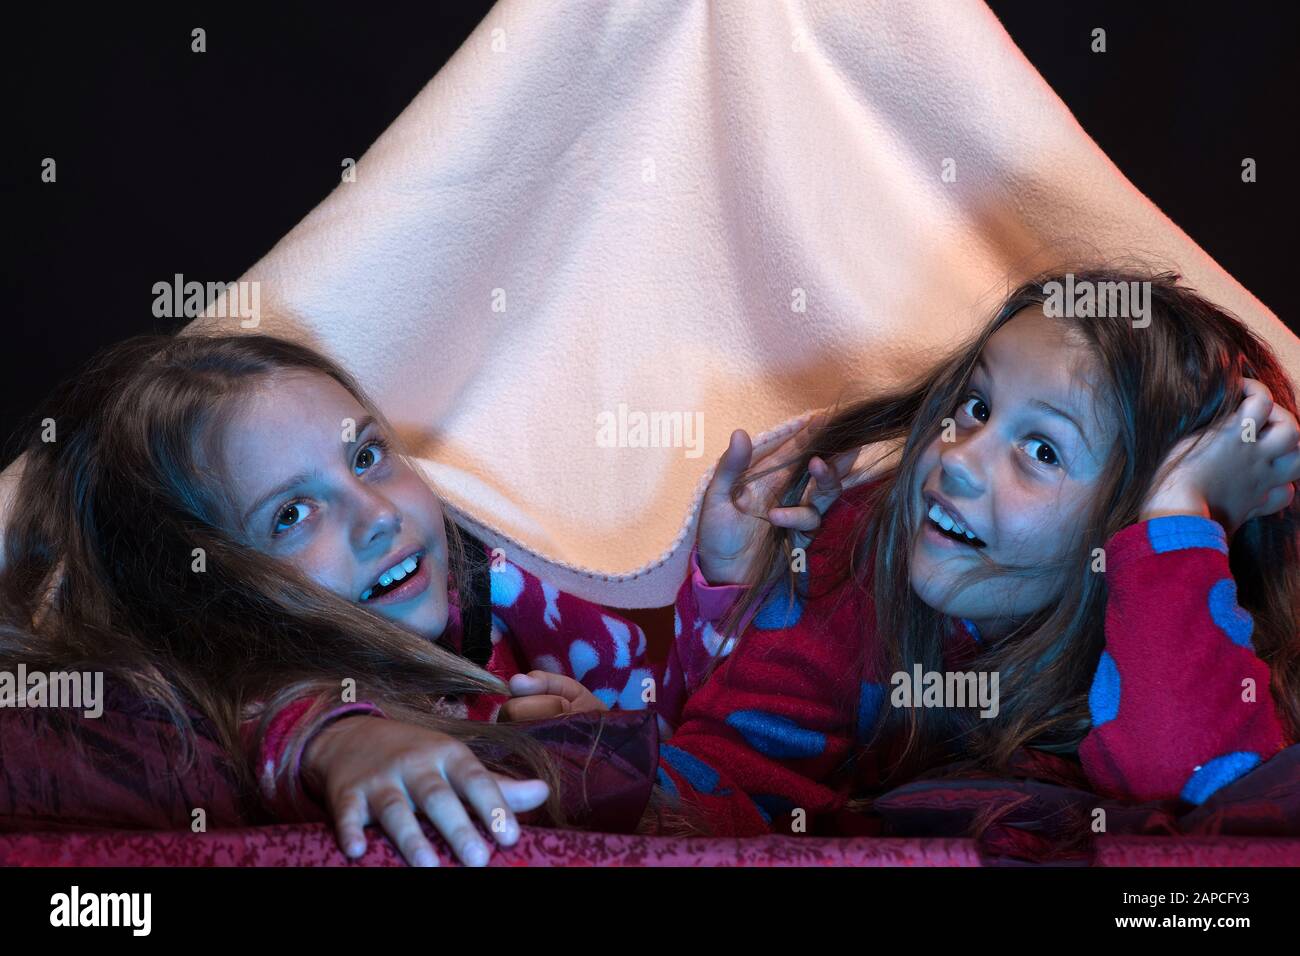 Pyjamas party for children. Girl friends under blanket pulling on each  others hair. Girls with concentrated faces. Kids wearing red jammies in bed  on black background. Children and PJs party concept Stock